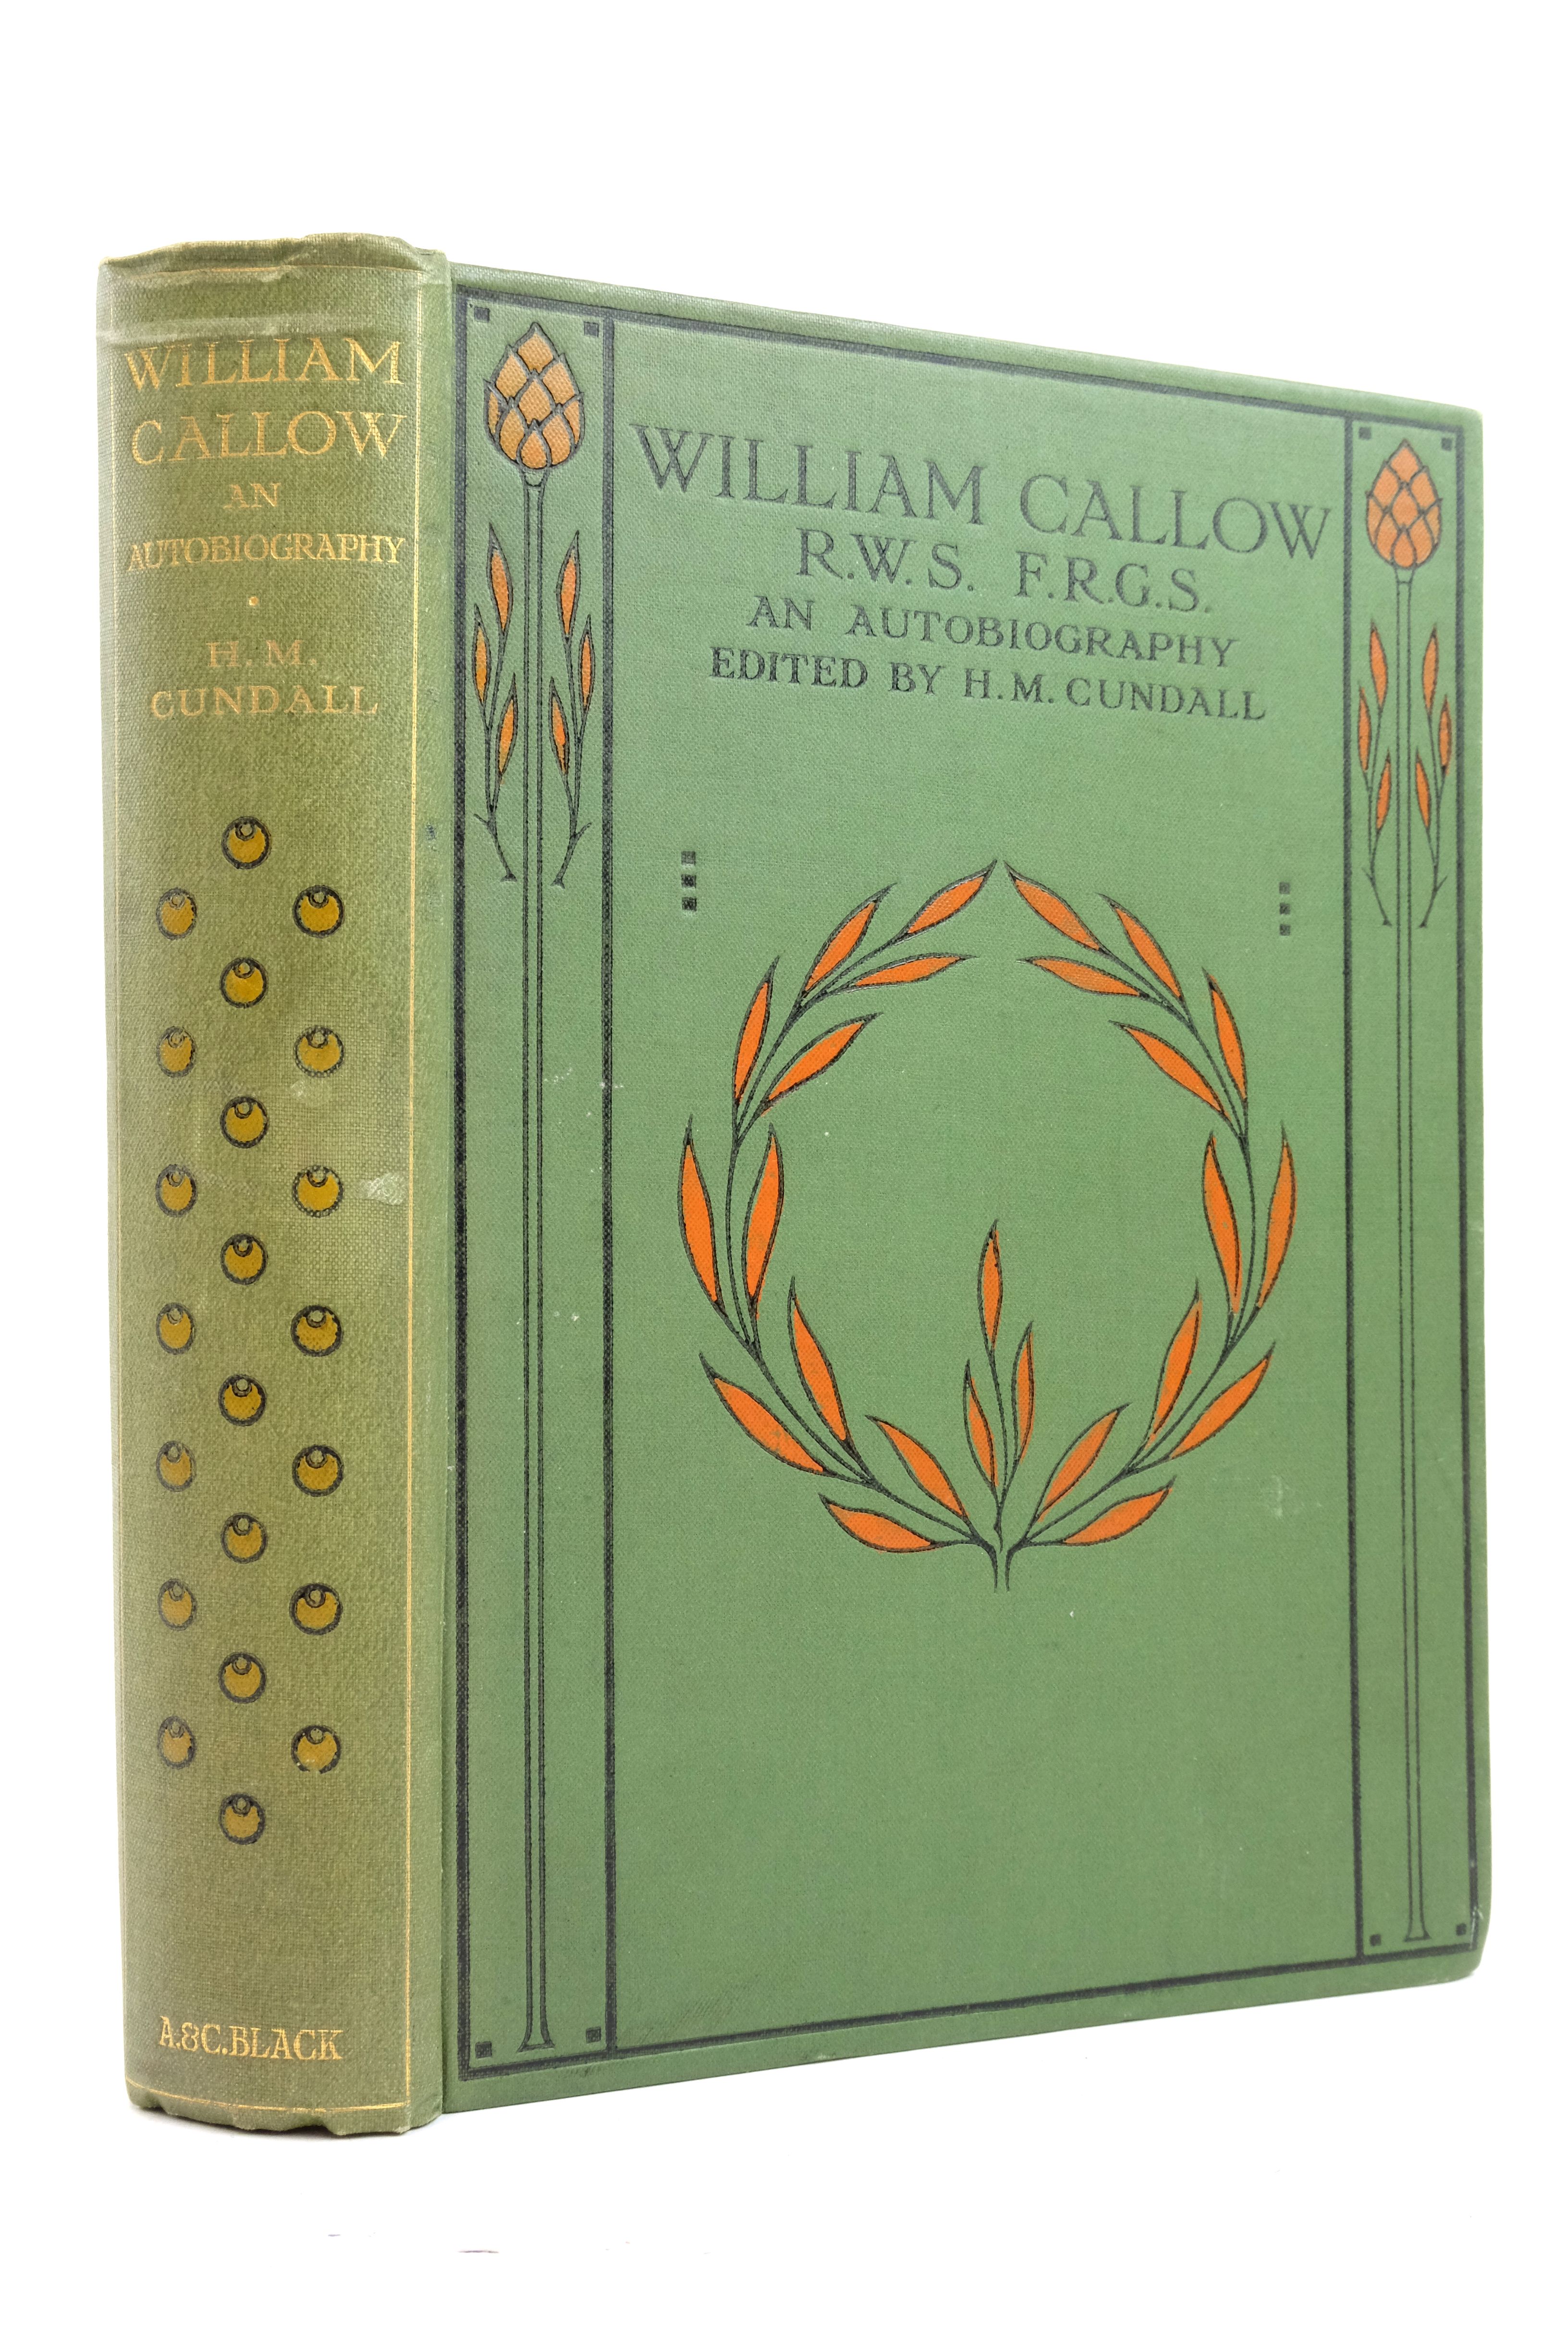 Photo of WILLIAM CALLOW R.W.S., F.R.G.S. written by Callow, William Cundall, H.M. published by Adam &amp; Charles Black (STOCK CODE: 2137057)  for sale by Stella & Rose's Books